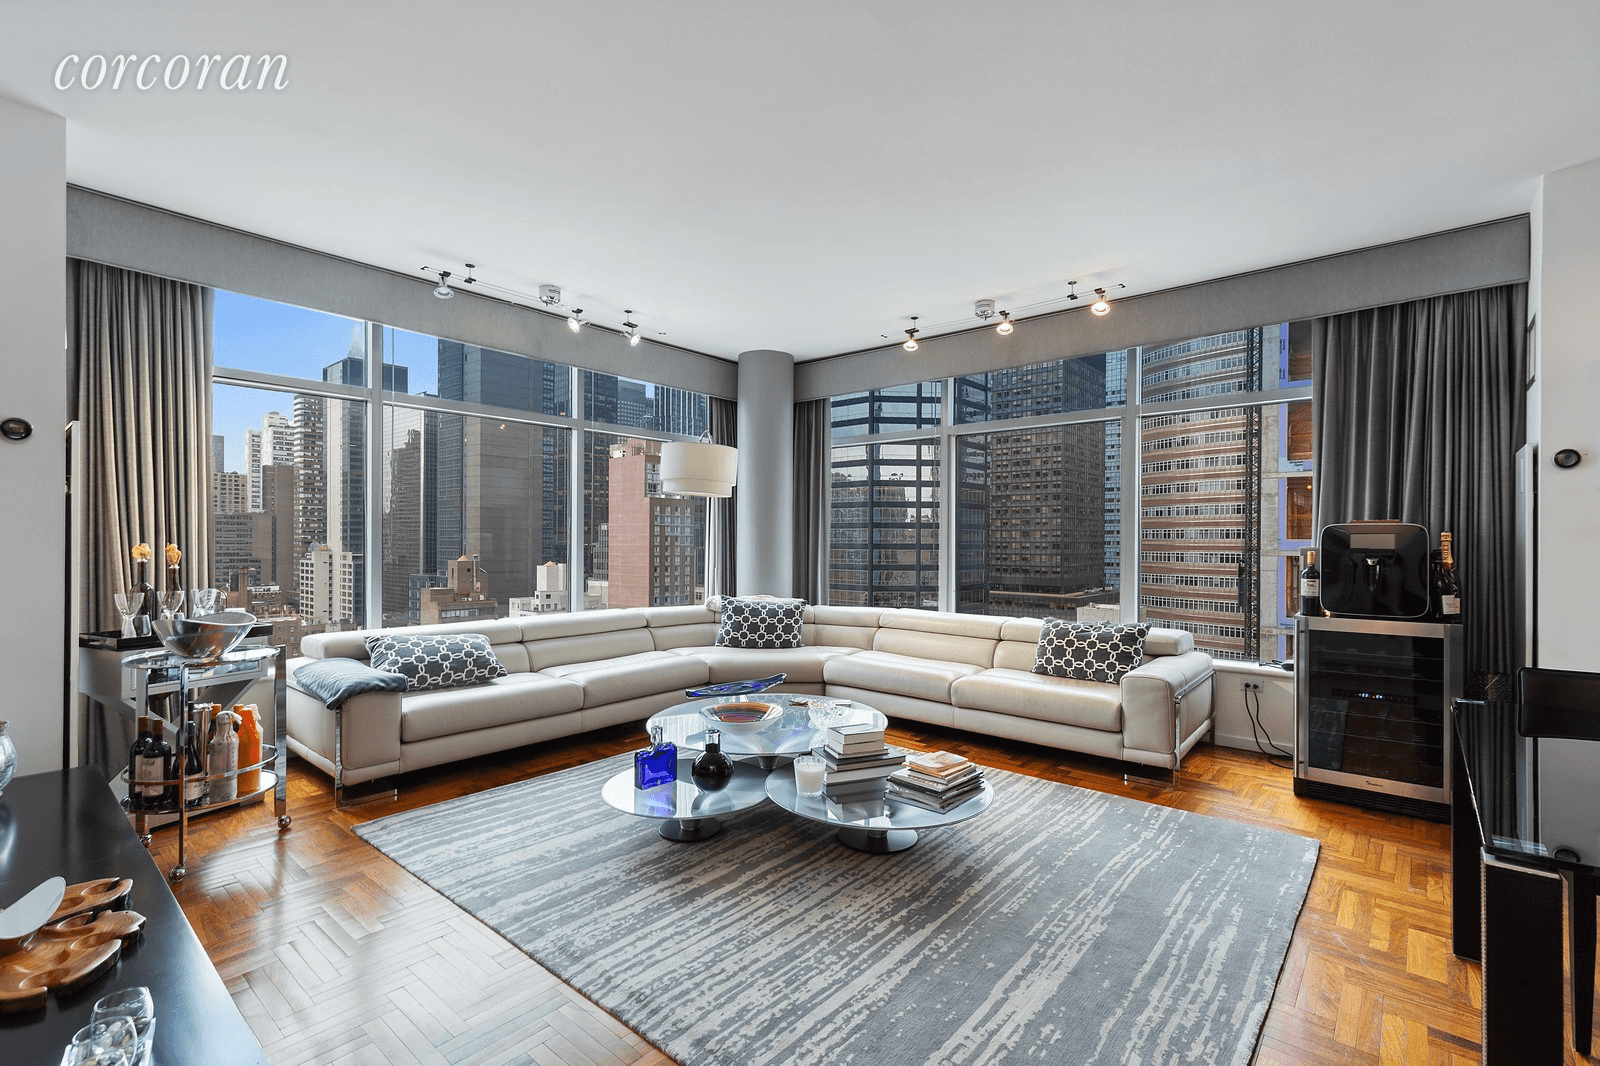 Immaculate High Floor Huge Corner Two Bedroom Two Bathroom with Gorgeous Three Exposure Views in One of the Most Desirable Condo Buildings in Midtown East !